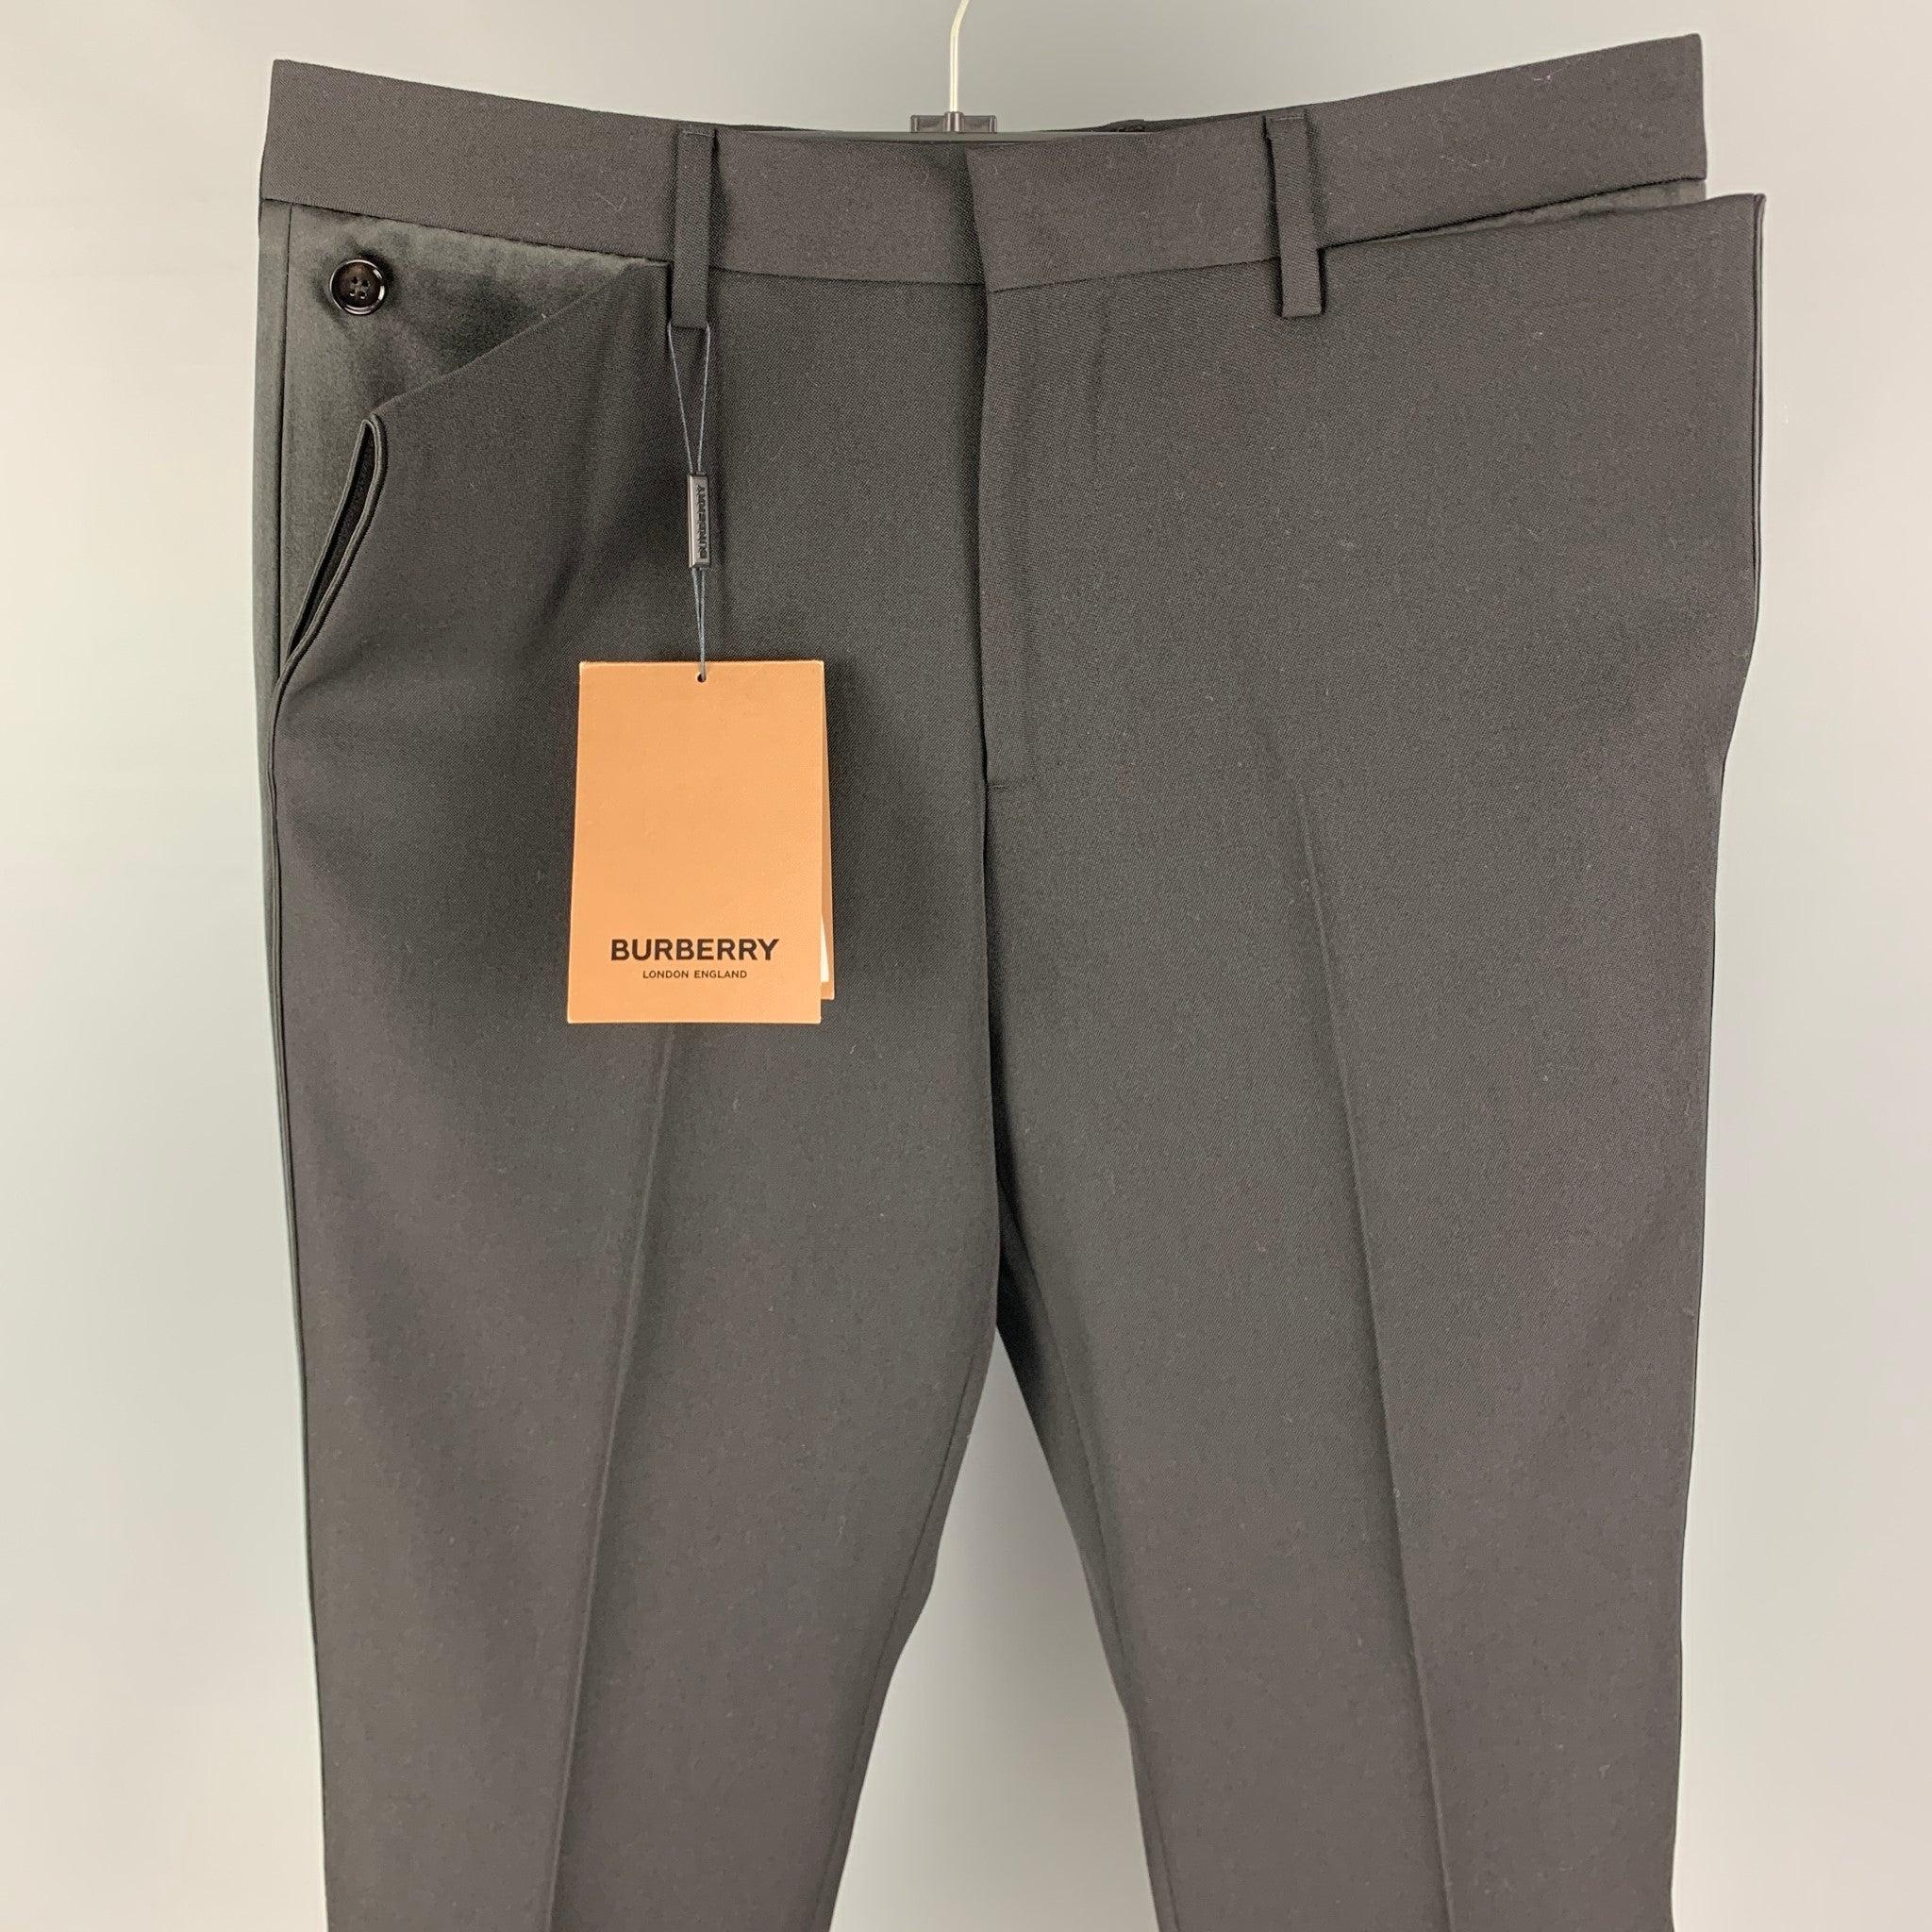 BURBERRY dress pants comes in a black wool featuring a flat front, buttoned details, front tab, and a zip fly closure. Made in Italy.
New with tags. 

Marked:   48 

Measurements: 
  Waist: 32 inches Rise: 10 inches Inseam: 32 inches Leg Opening: 16